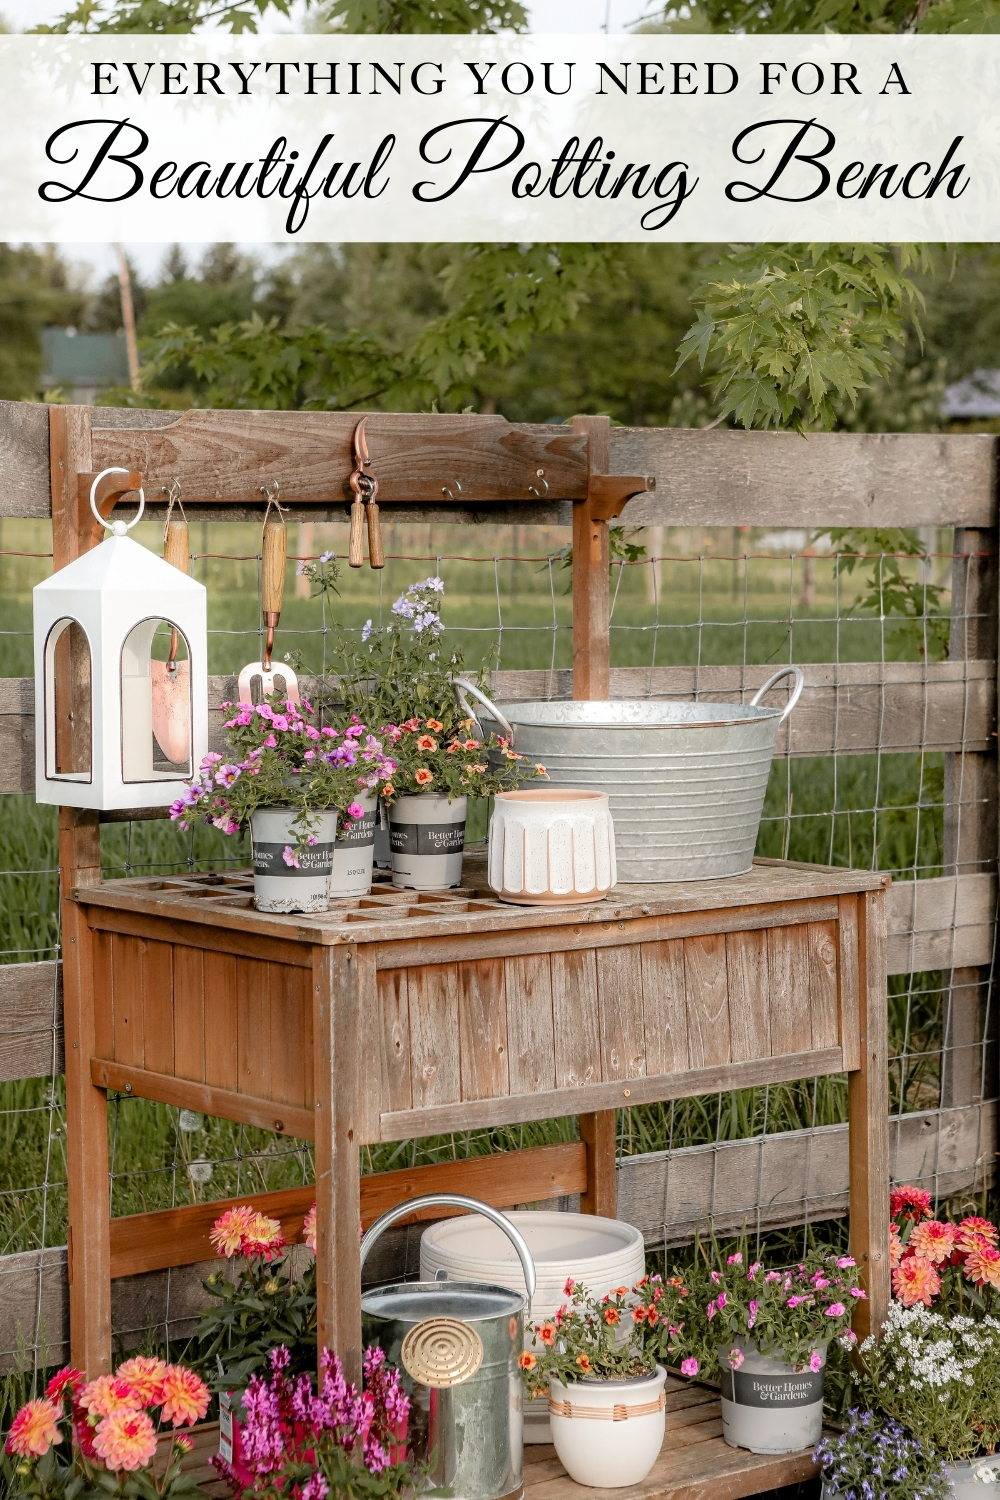 Everything you need for a beautiful potting bench